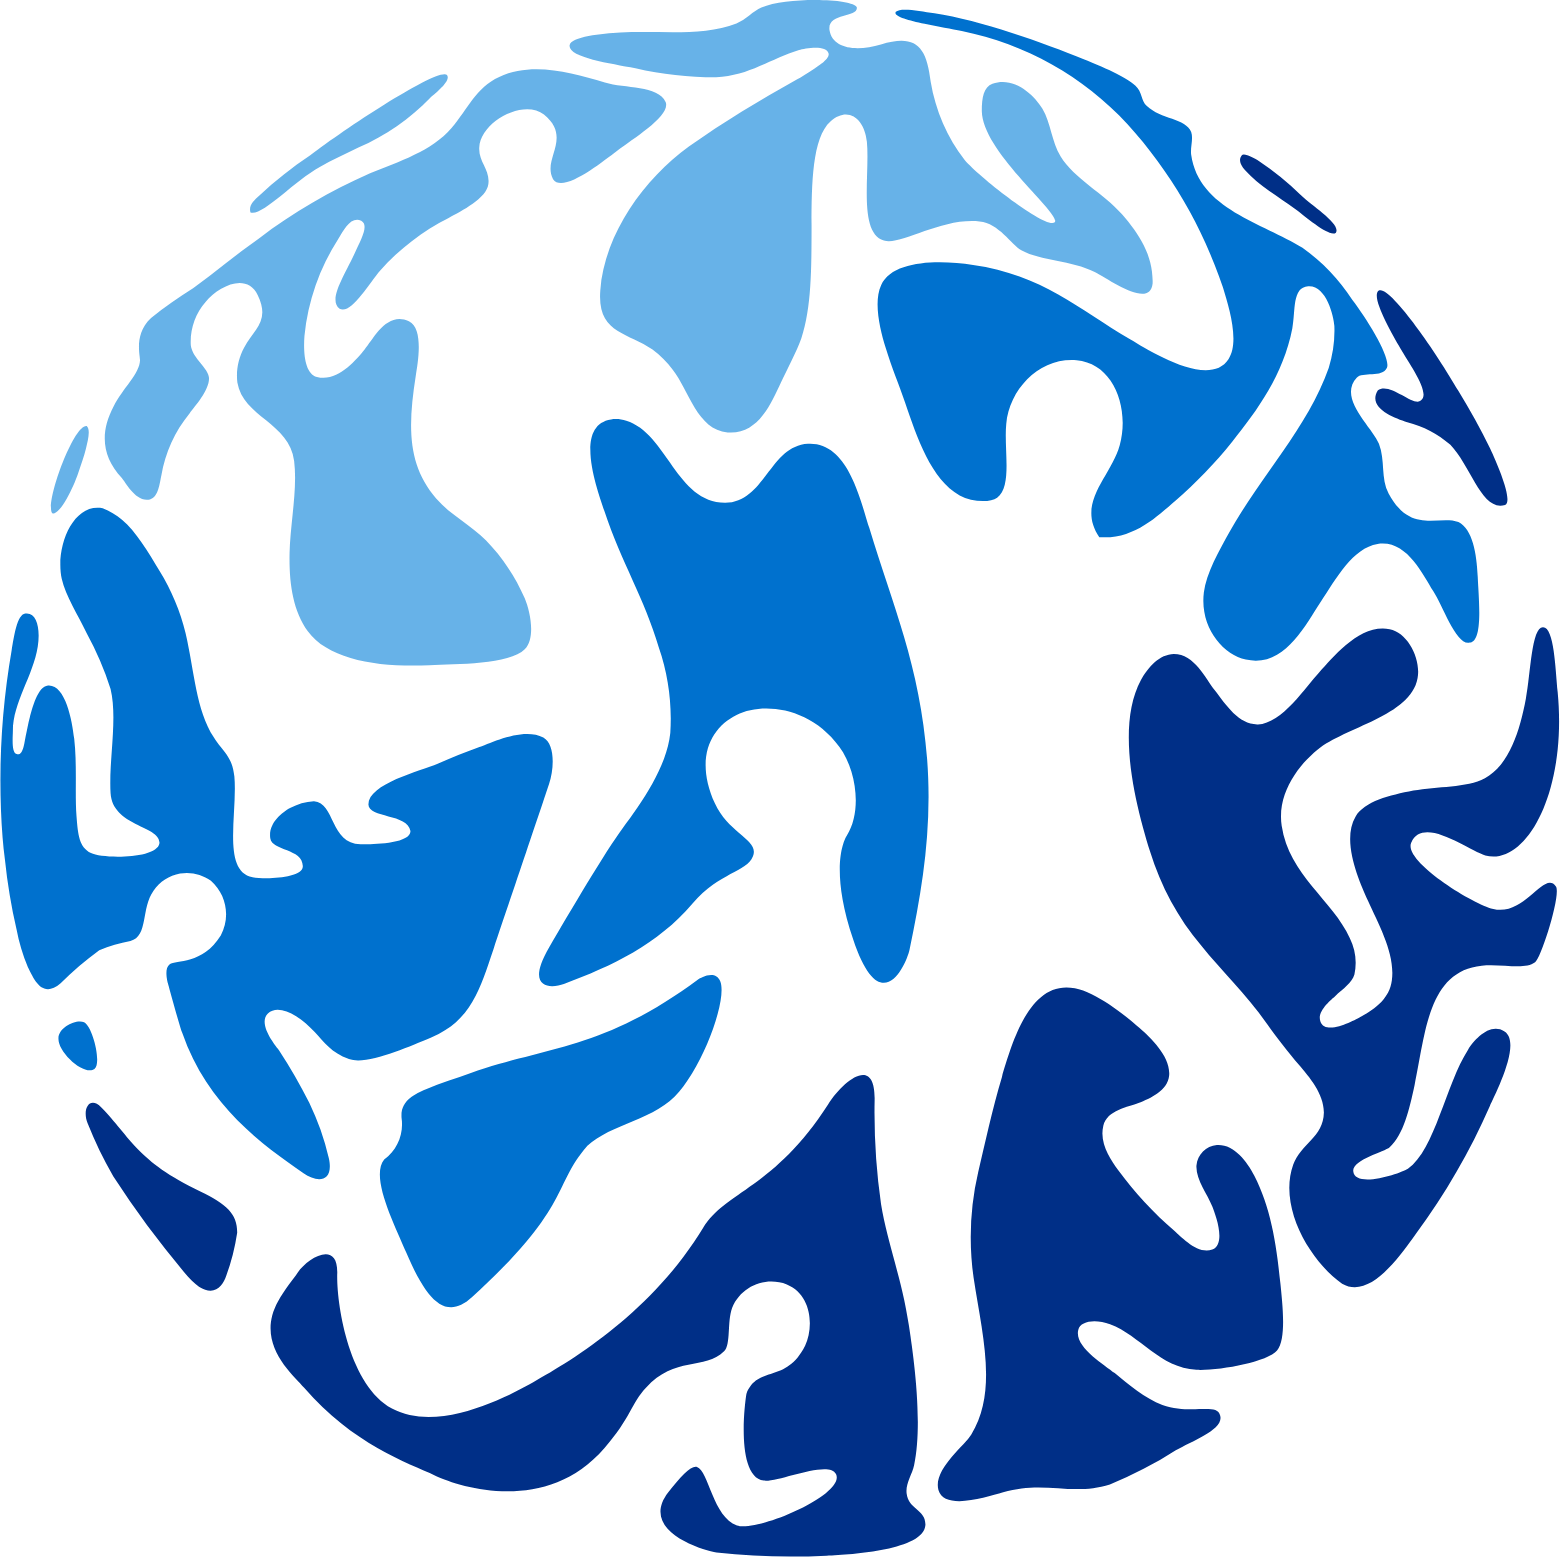 USANA logo in transparent PNG and vectorized SVG formats